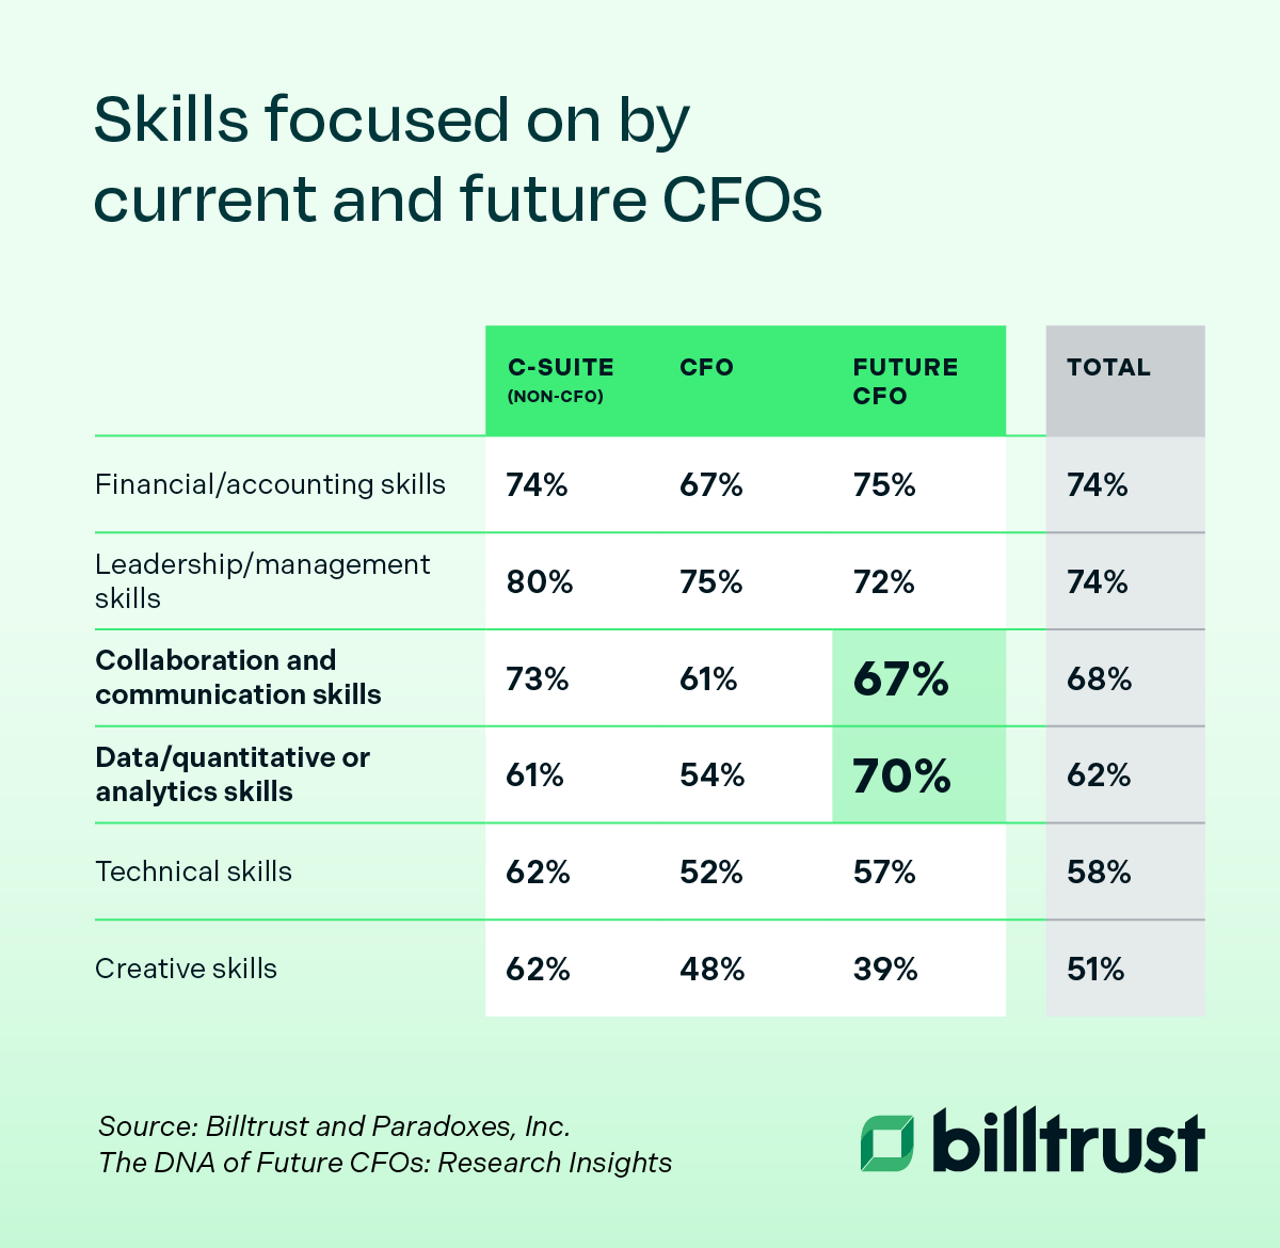 skills focused on by current and future CFOs